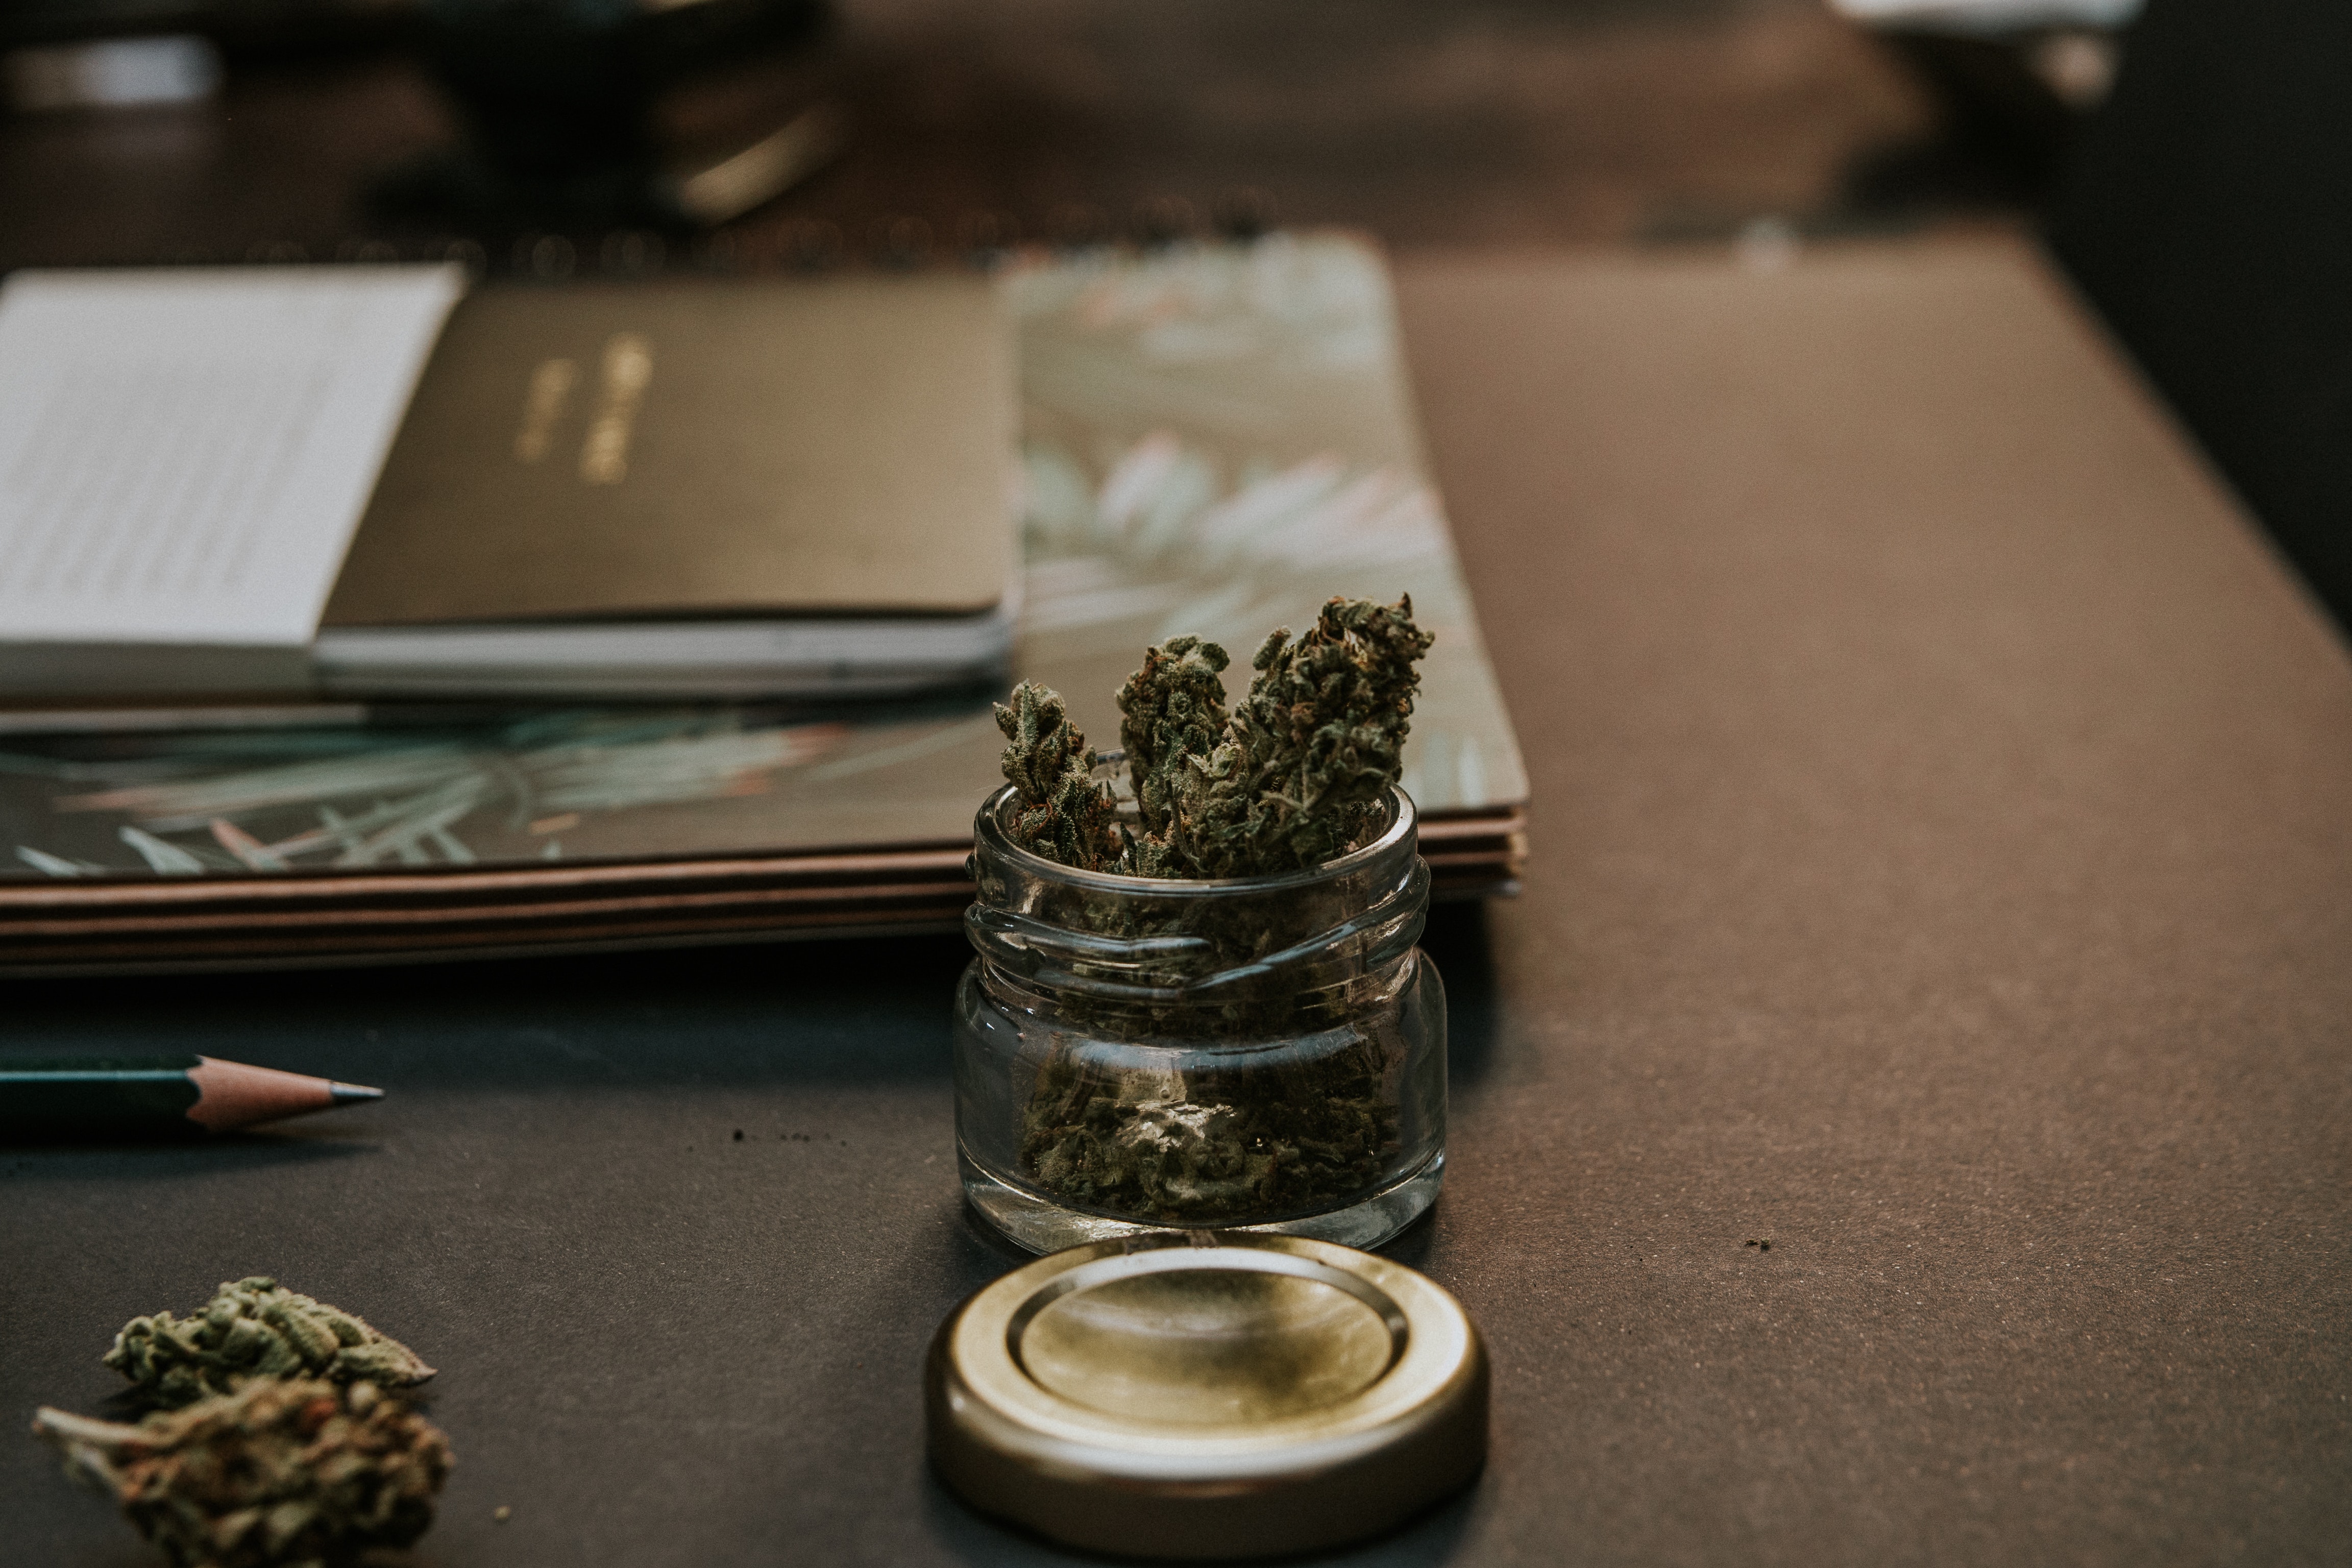 Picture of a glass jar filled with weed.